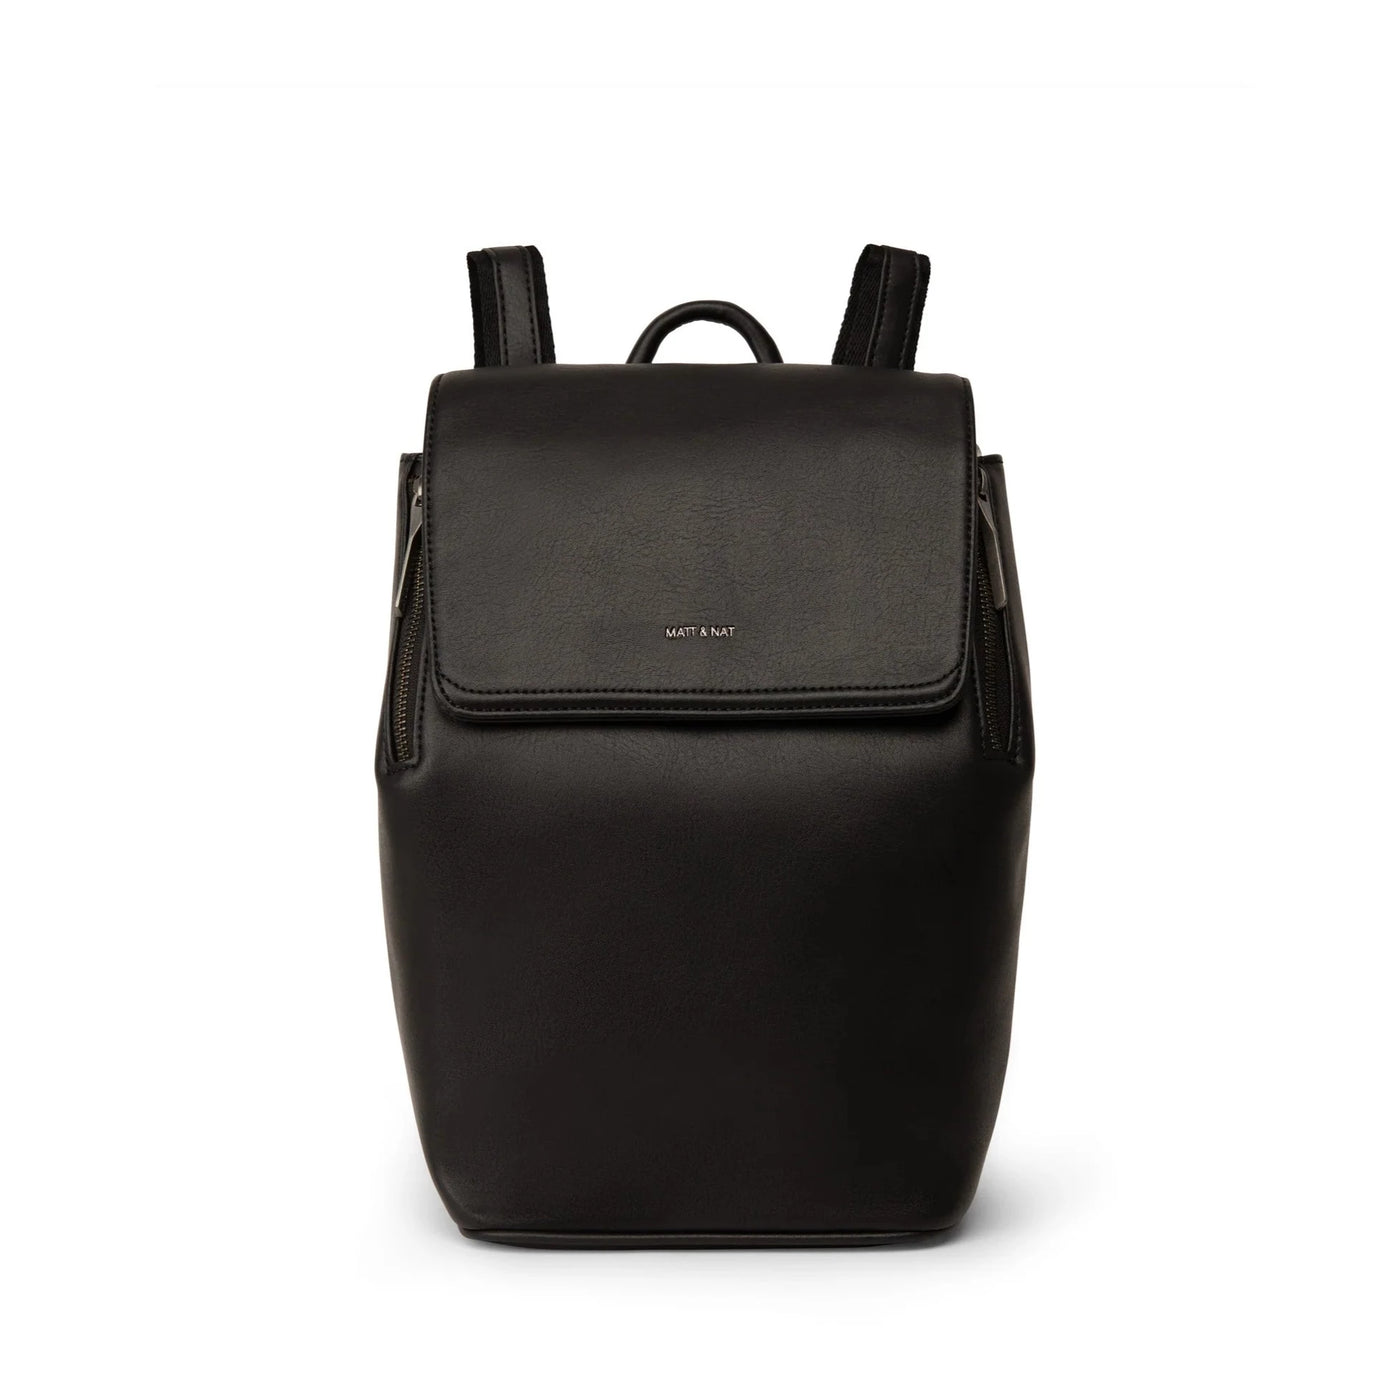 Matt and nat Fabimini Vegan Leather Backpack, the local space, local canadian brands